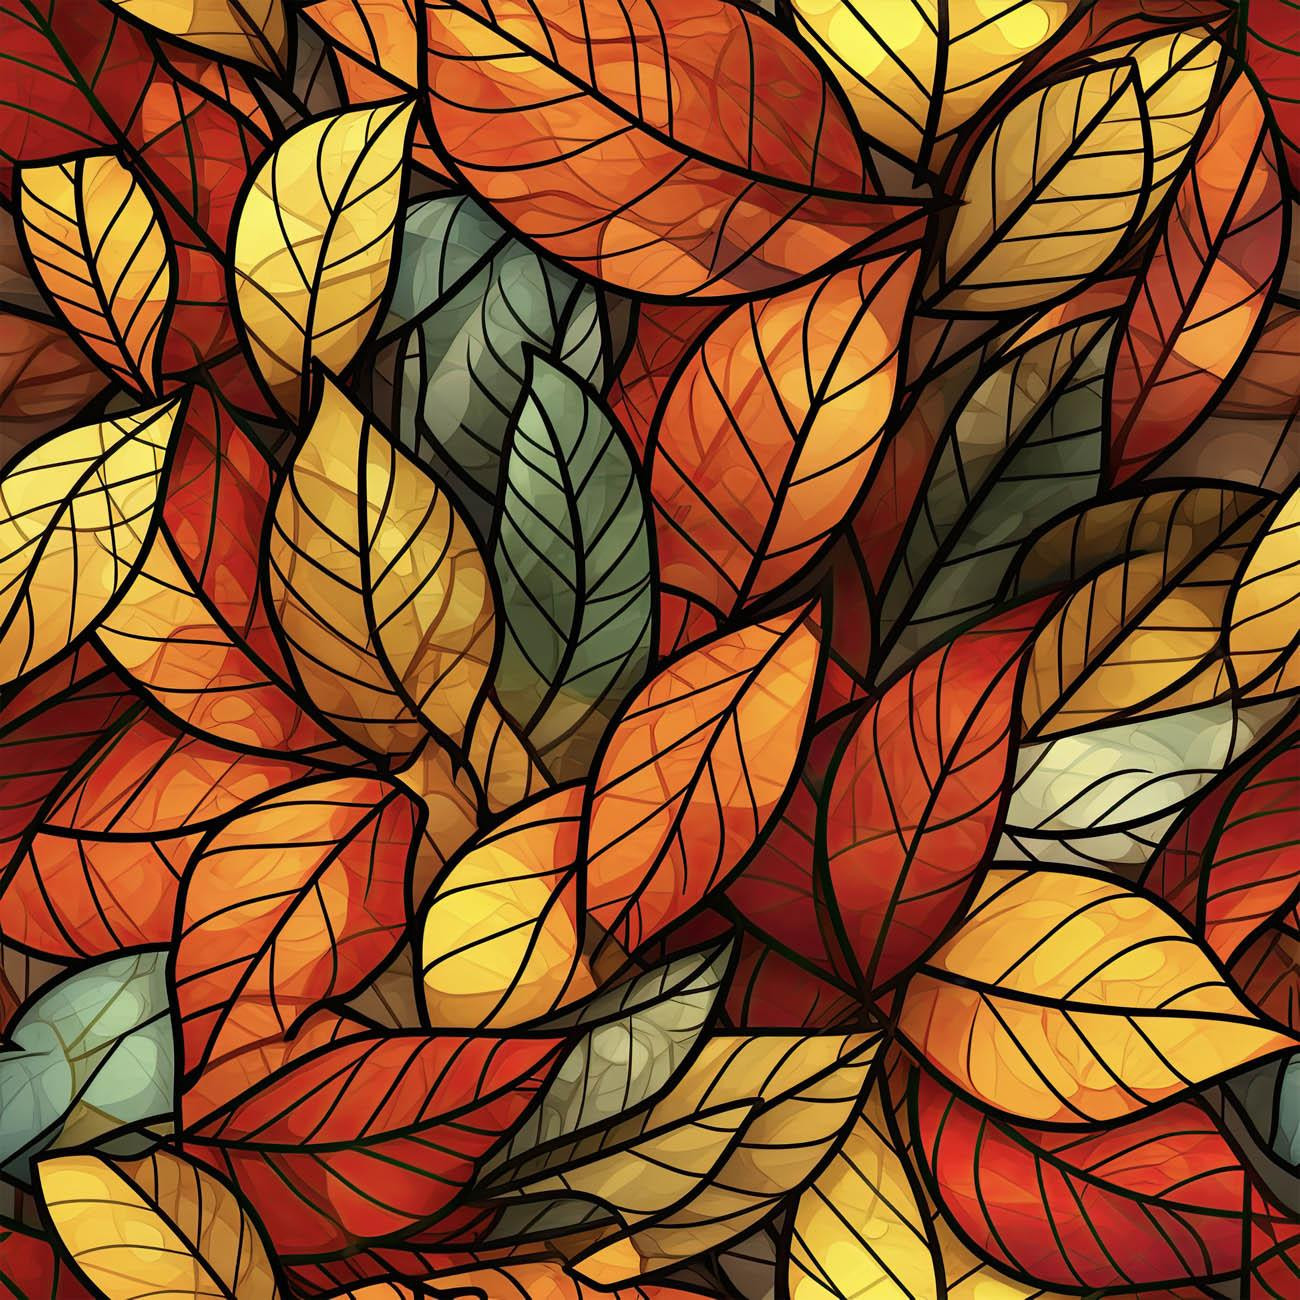 LEAVES / STAINED GLASS PAT. 2